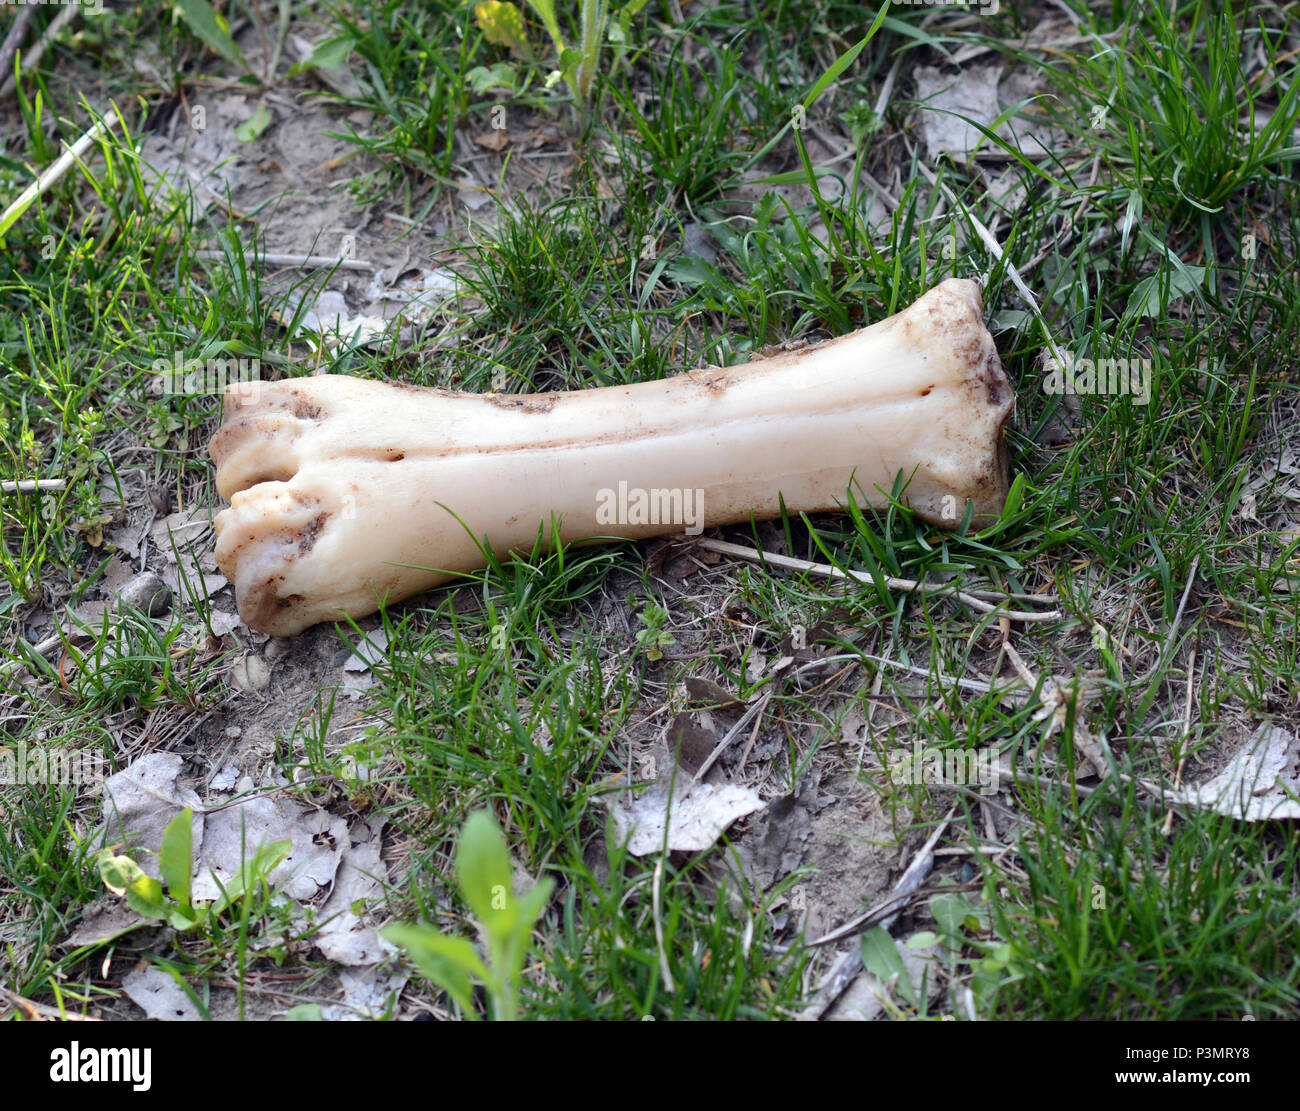 A large bone that has been chewed by scavengers lays on the ground. Stock Photo